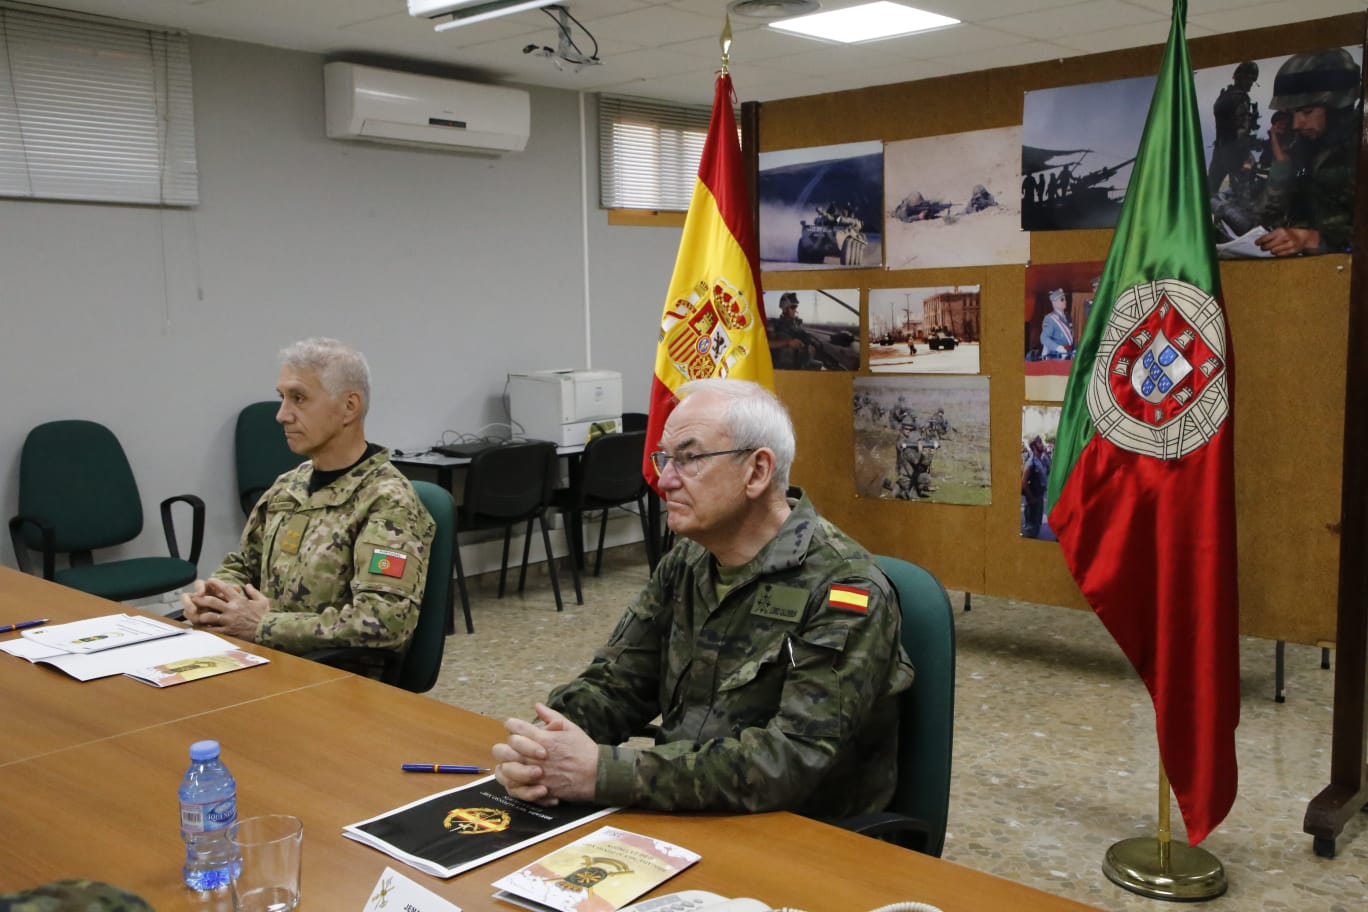 Presentation of the Unit to the JEMAD and his Portuguese counterpart